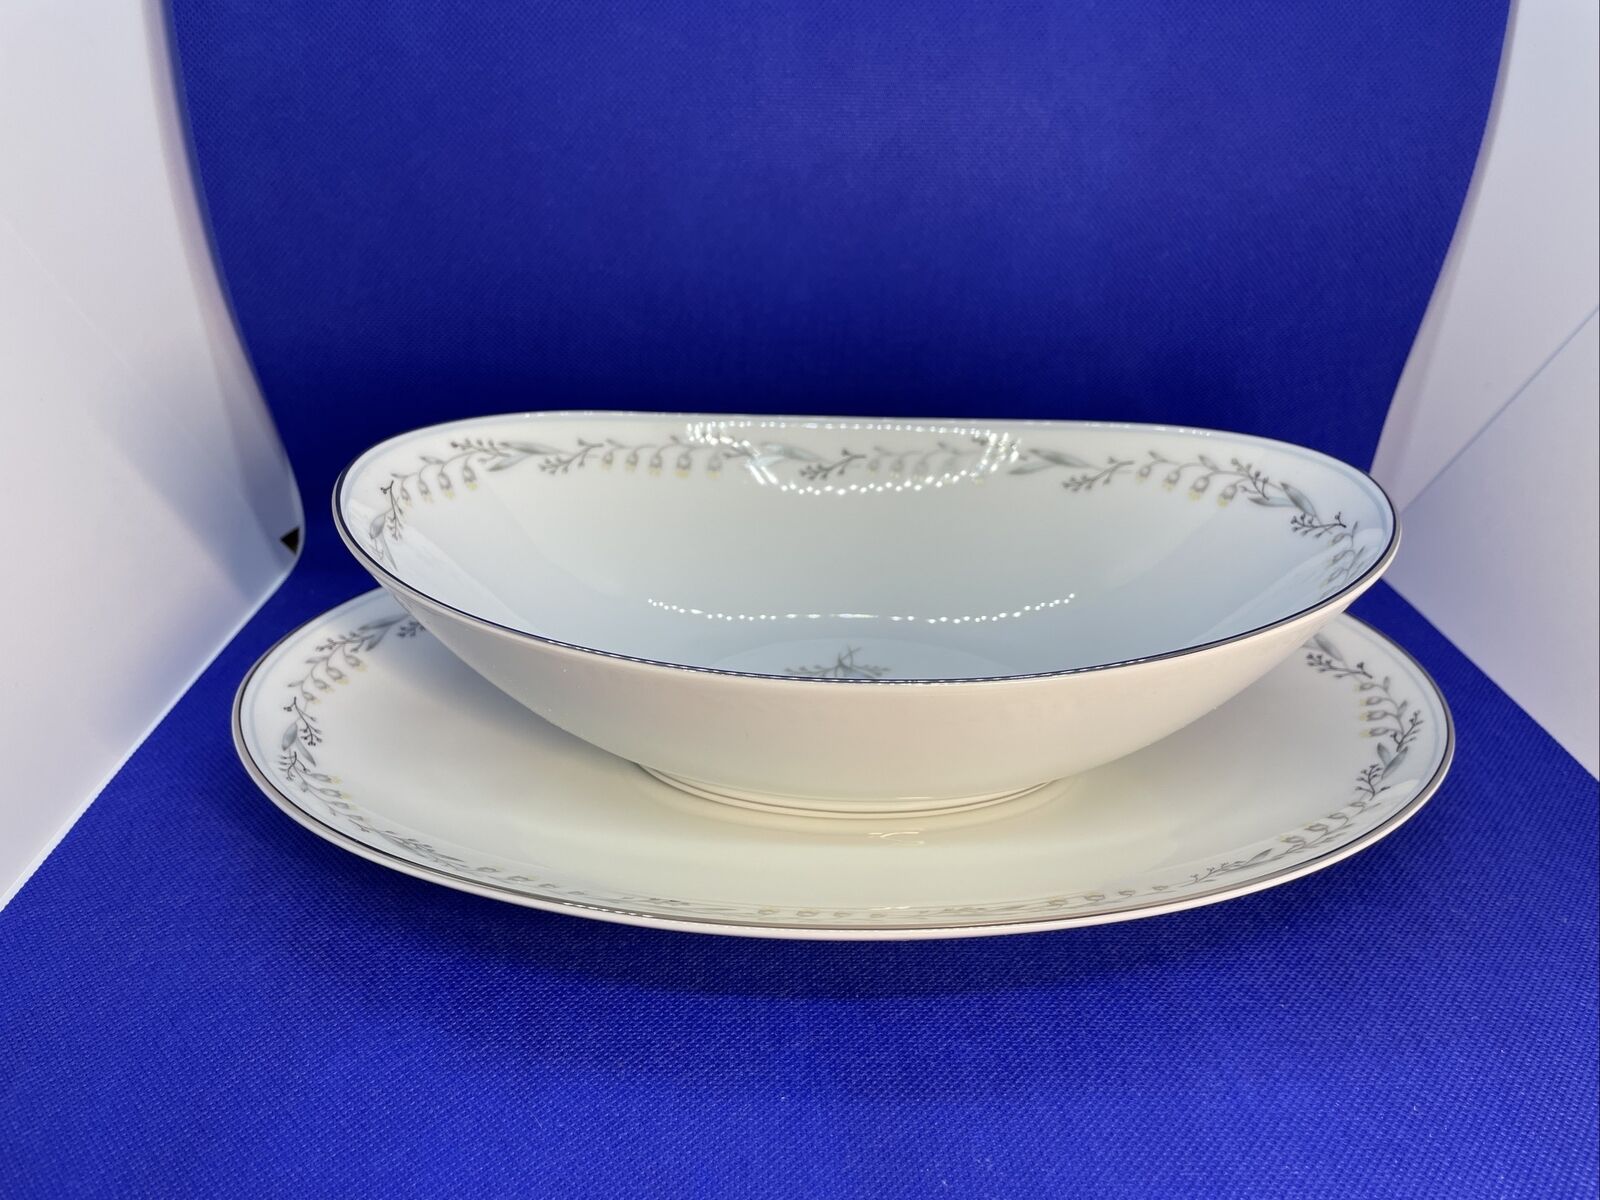 Noritake Natalie 5815 Serving Platter  And Serving Bowl Replacements Lot Of 2